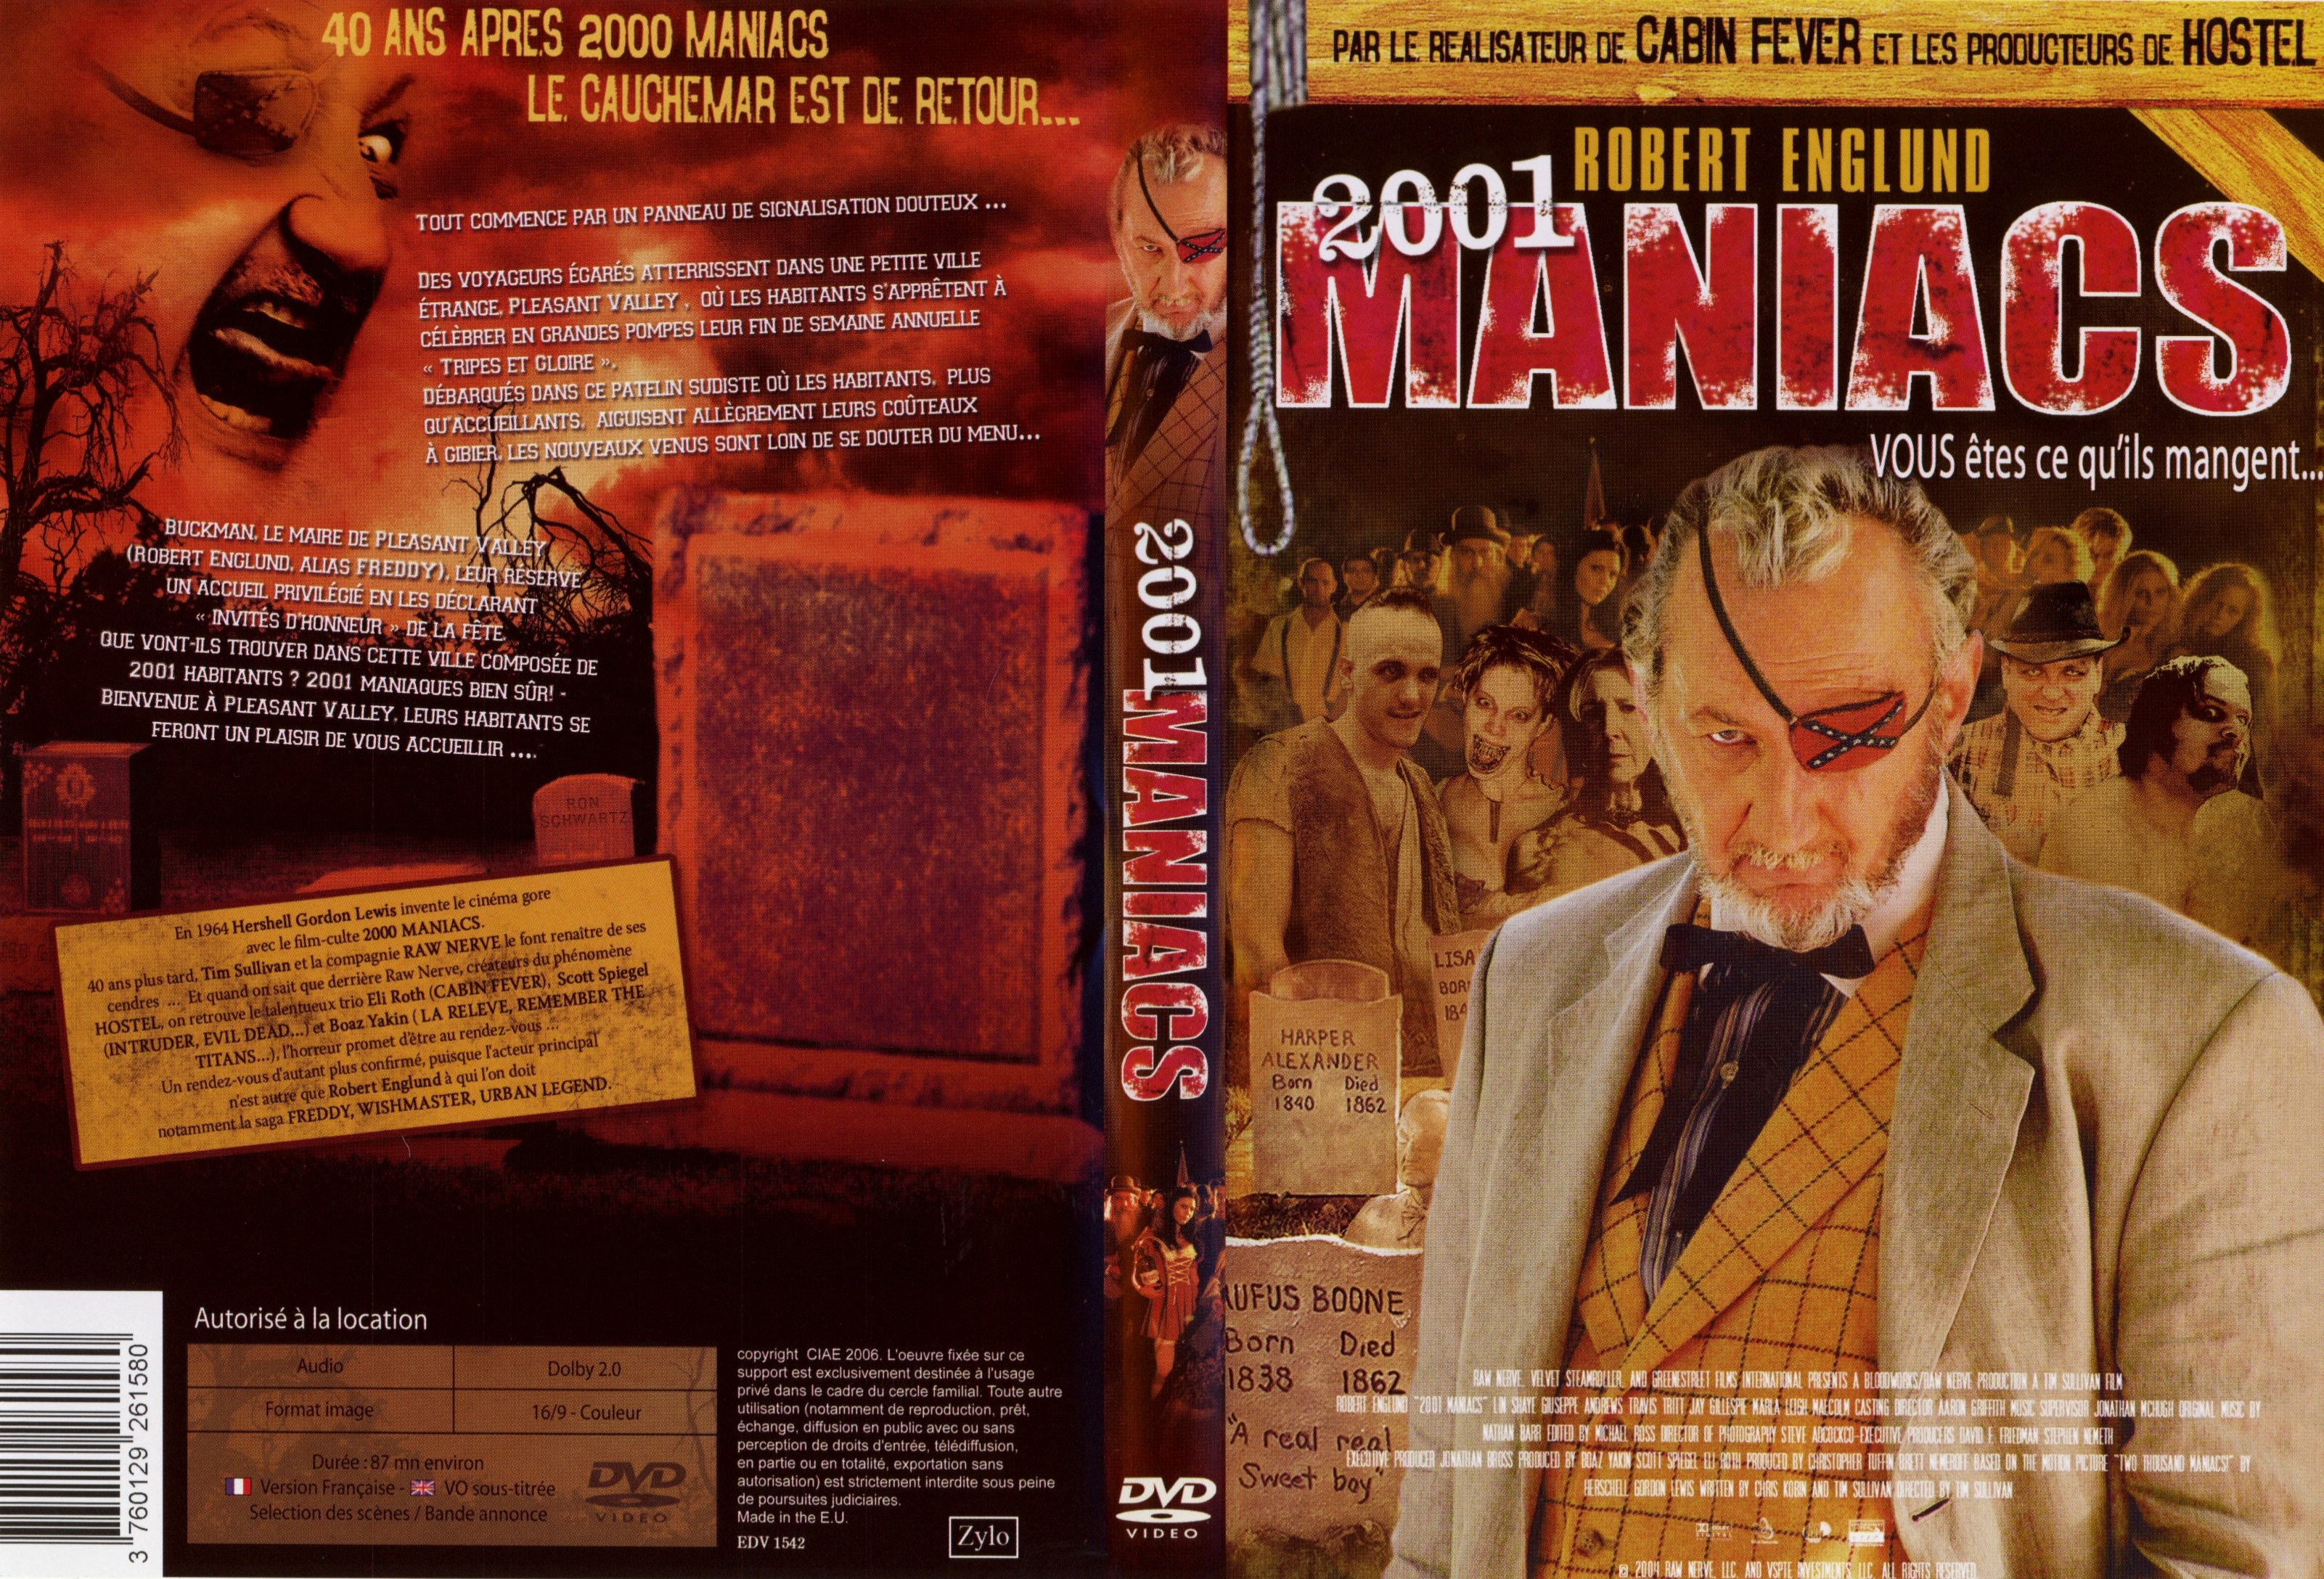 Jaquette DVD 2001 maniacs